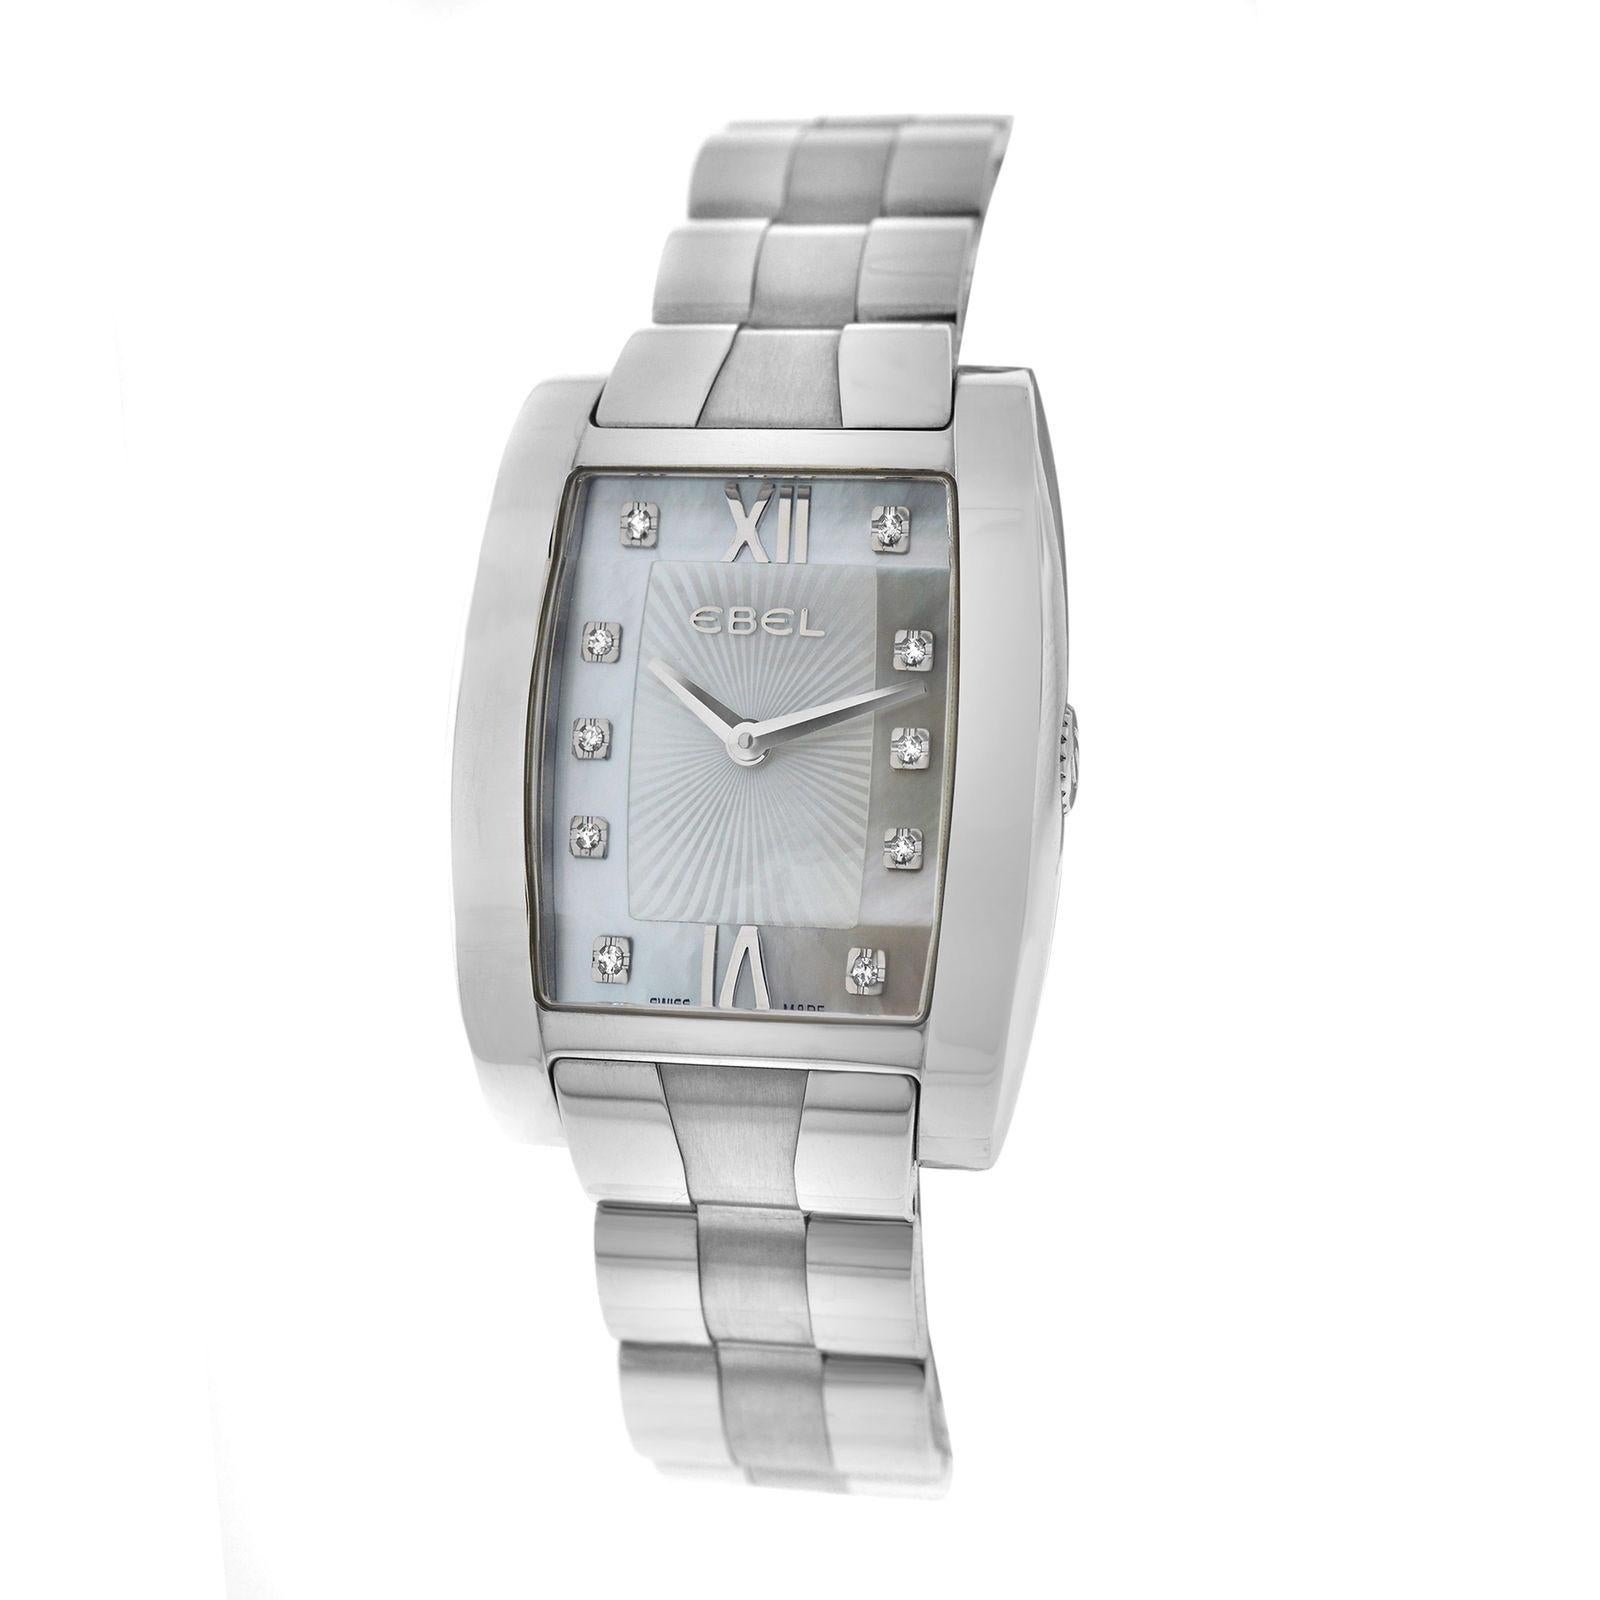 Brand	Ebel
Model	Tarawa E9656J21
Gender	Ladies
Condition	New store display
Movement	Swiss Quartz
Case Material	Stainless Steel
Bracelet / Strap Material	
Stainless Steel

Clasp / Buckle Material	
Stainless Steel 

Clasp Type	Butterfly